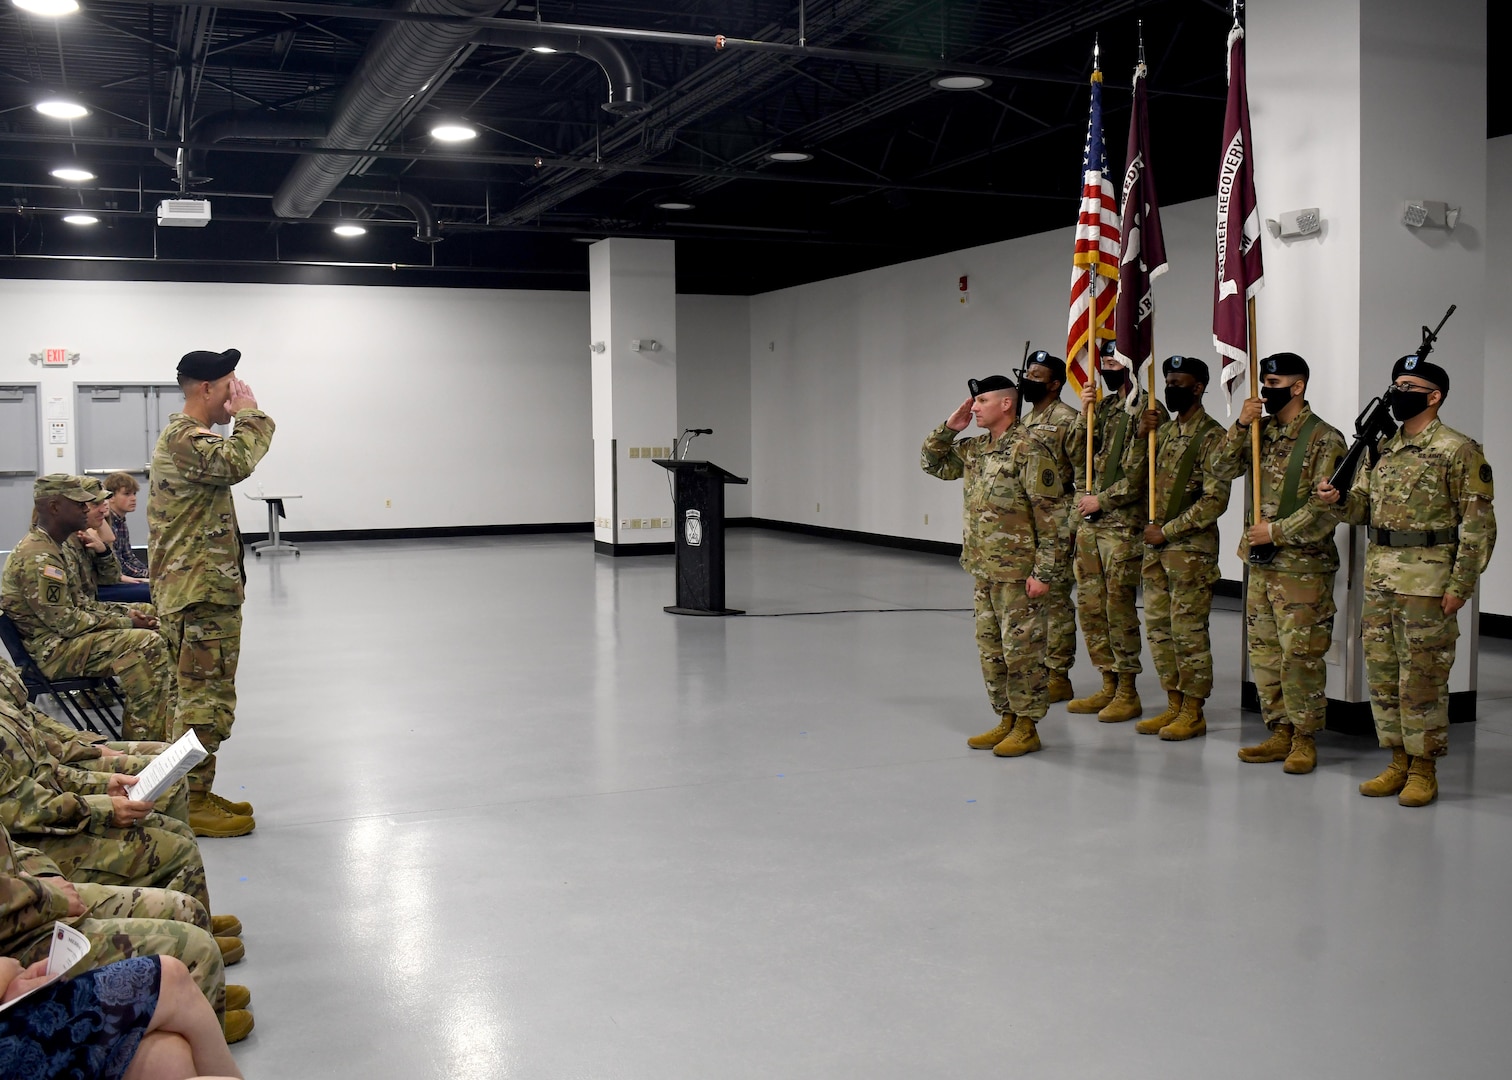 Col. Matthew Mapes, left, the new commander of the U.S. Army Medical Department Activity (MEDDAC), Fort Drum, N.Y., salutes the organization color guard, officially closing out the MEDDAC change of command ceremony July 16, 2021.  During the ceremony, Mapes, a Highland Park, Ill. native, assumed command of the MEDDAC from Col. Robert Heath.